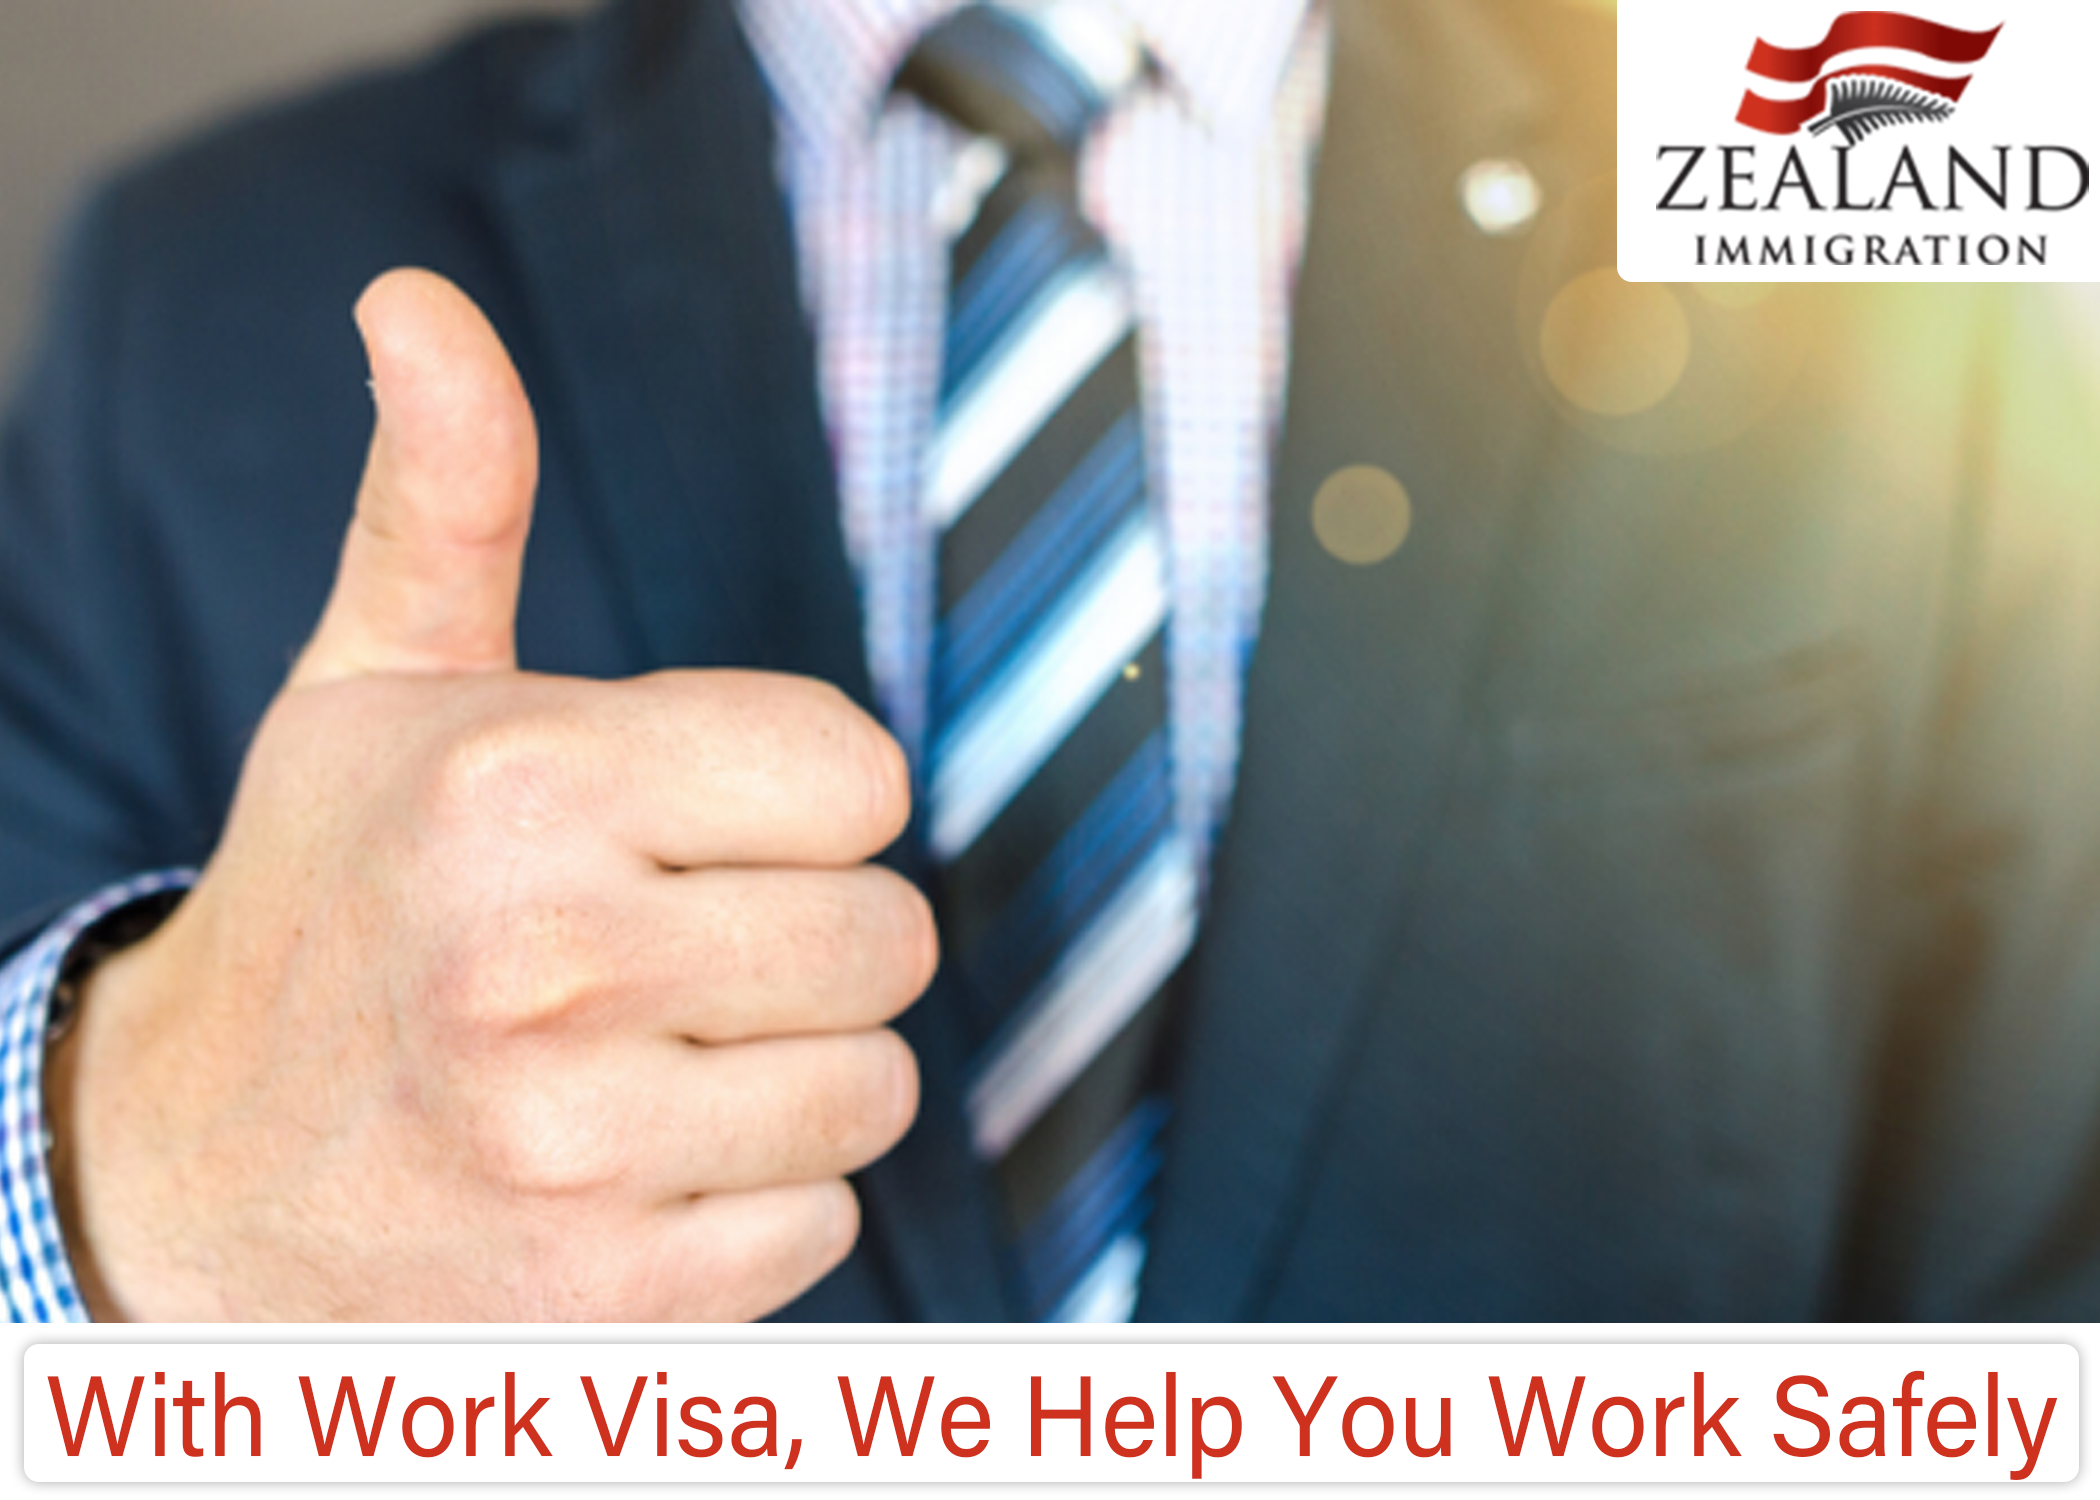 With Work Visa, We Help You Work Safely